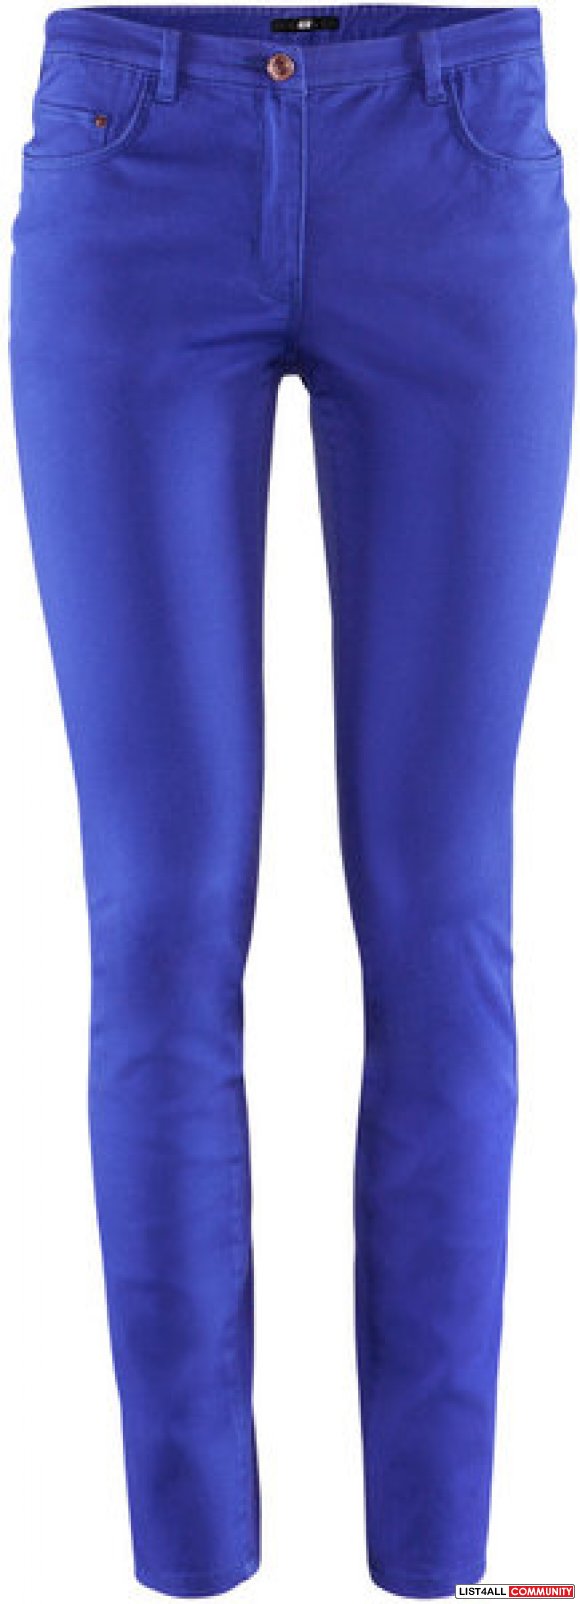 H&M Cobalt Electric Blue Pants Size 26 (New With Tags)